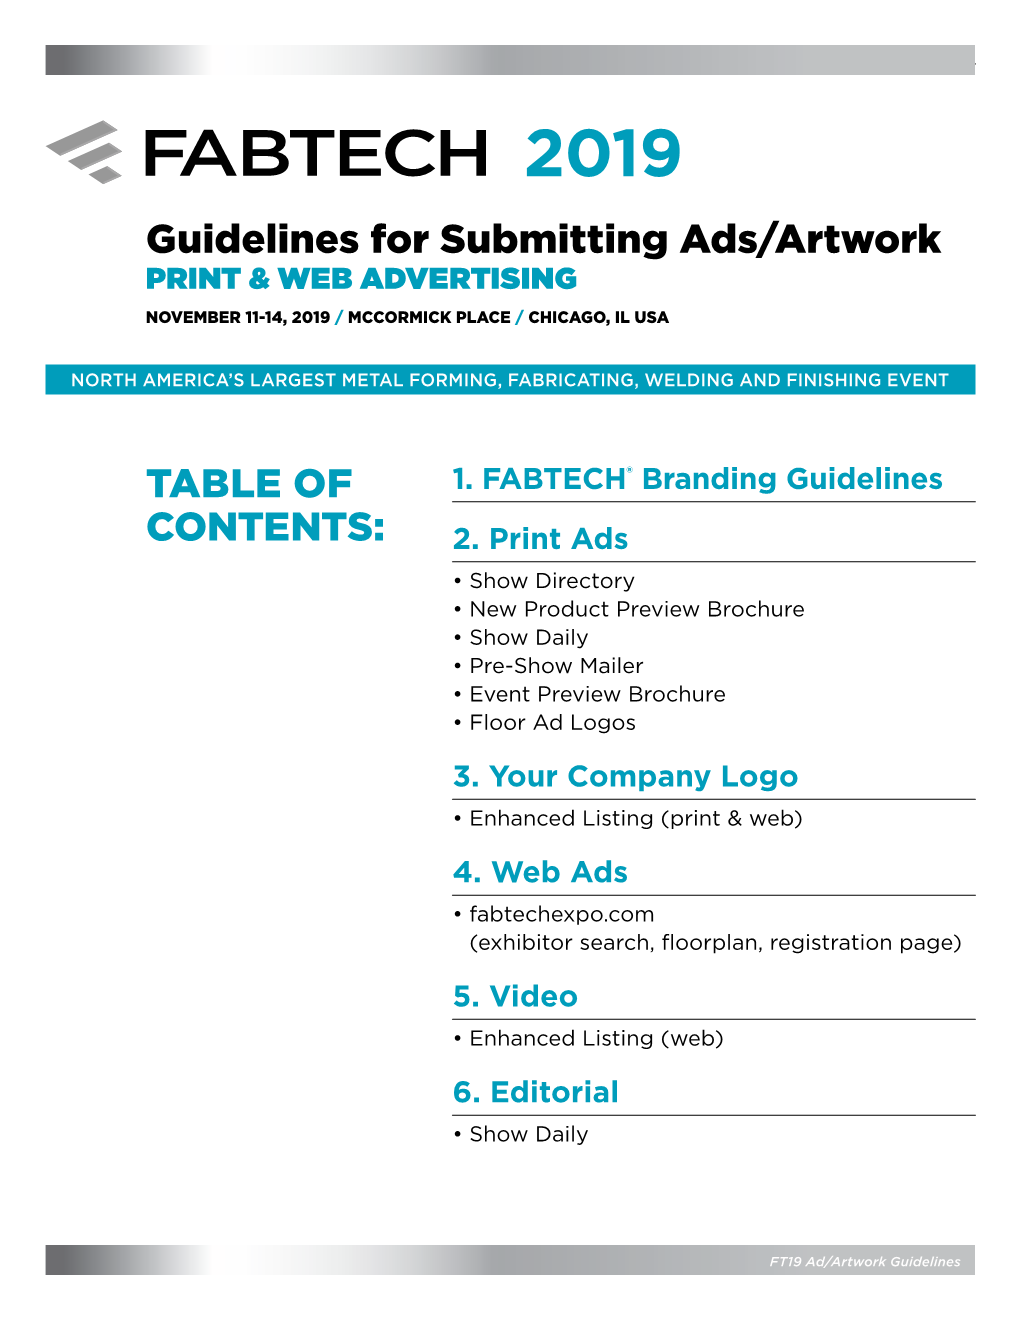 Guidelines for Submitting Ads/Artwork TABLE of CONTENTS